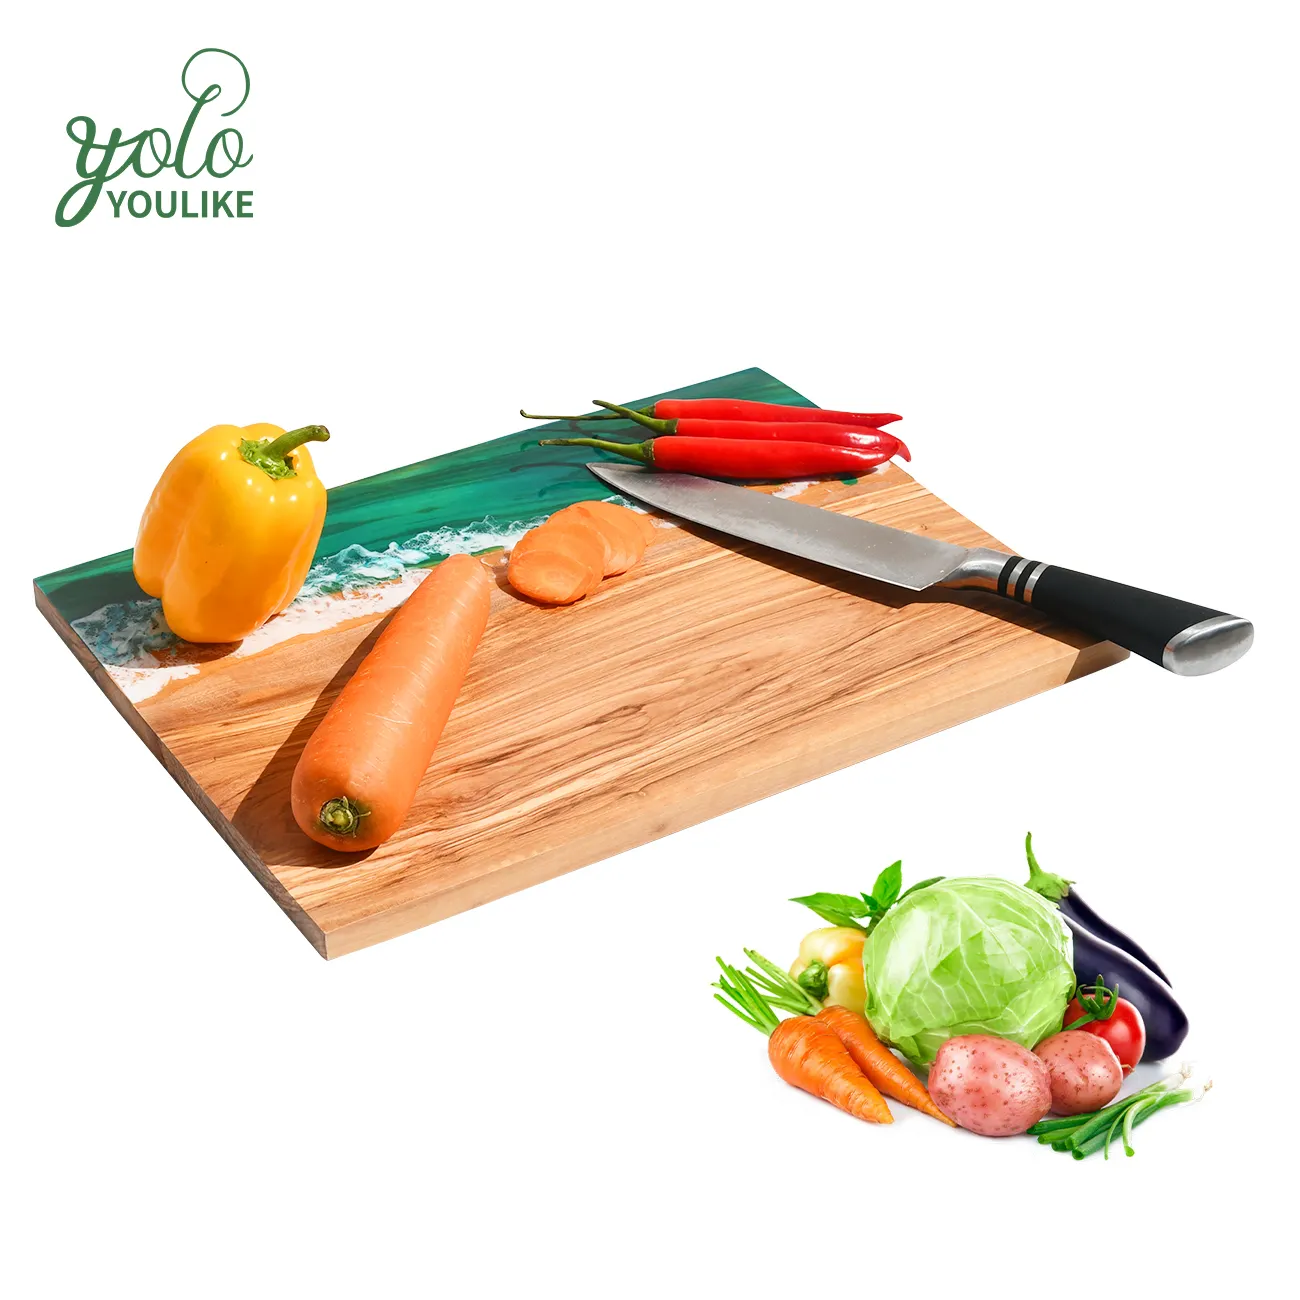 Wholesale Personalized Double Sided Olive Wood And Epoxy Resin Cutting Serving Board 16 x24 For Countertop